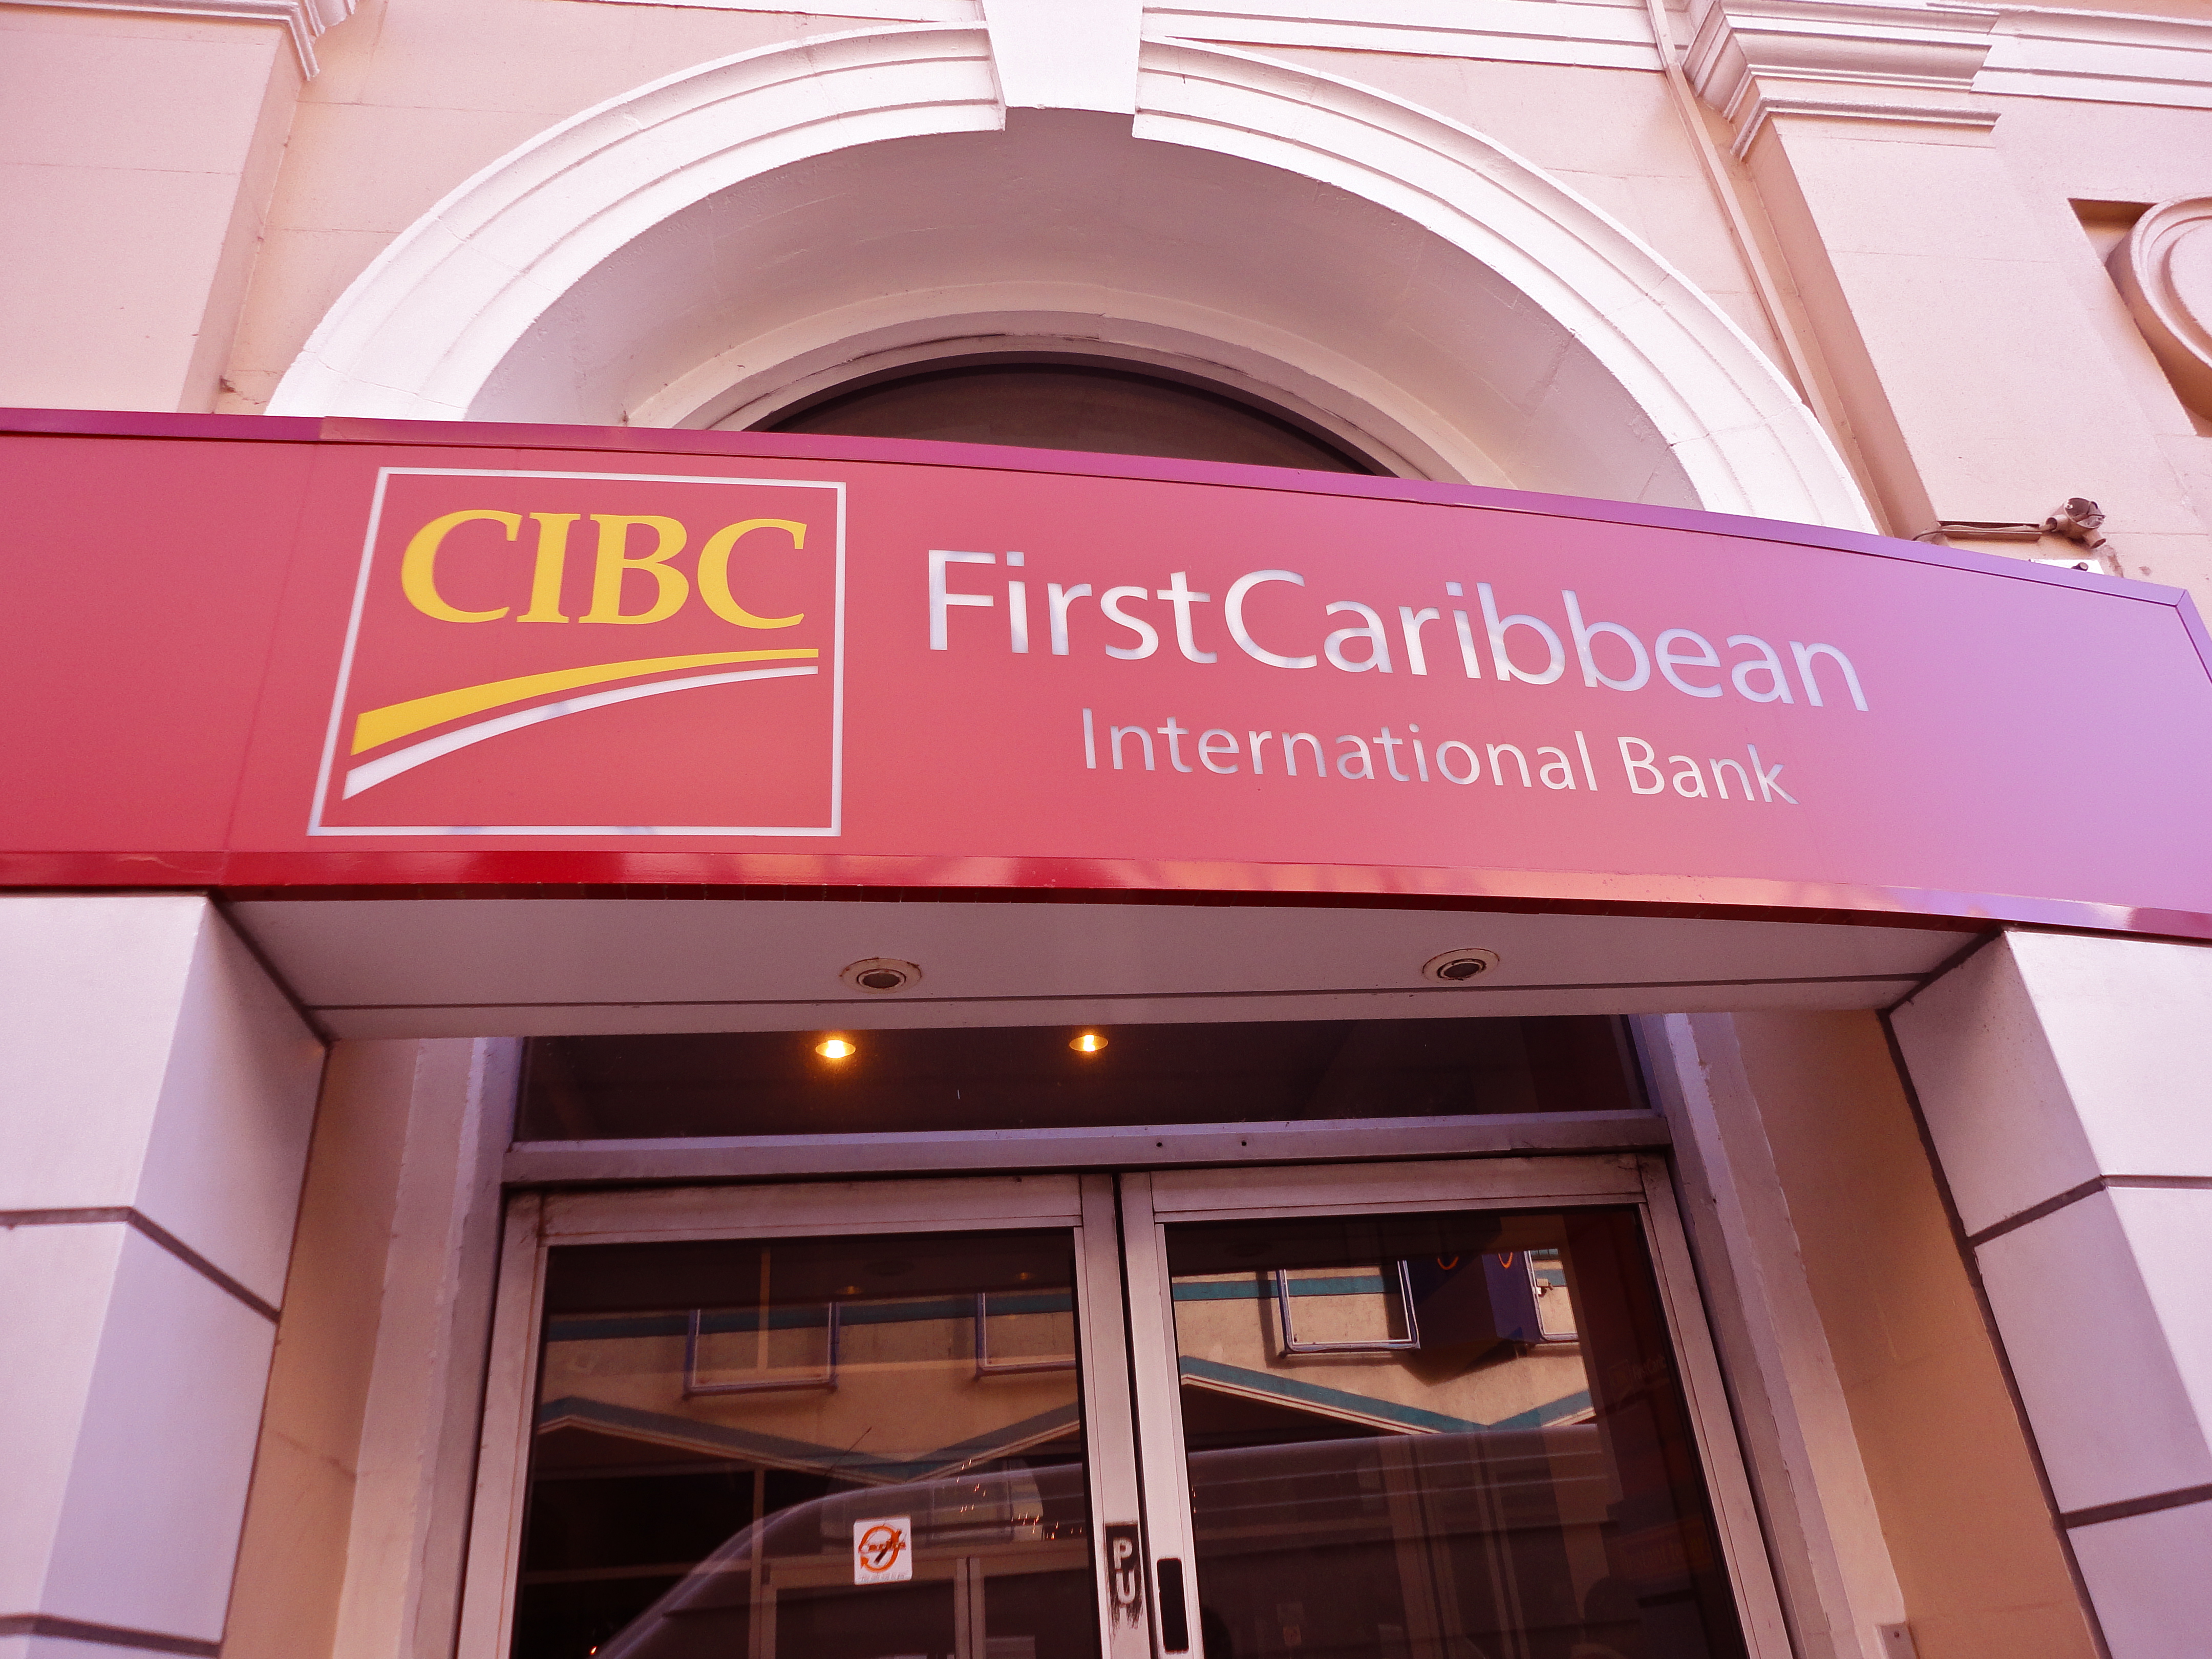 HERITAGE BANK TO ACQUIRE CIBC FIRSTCARIBBEAN’S  OPERATIONS IN BELIZE